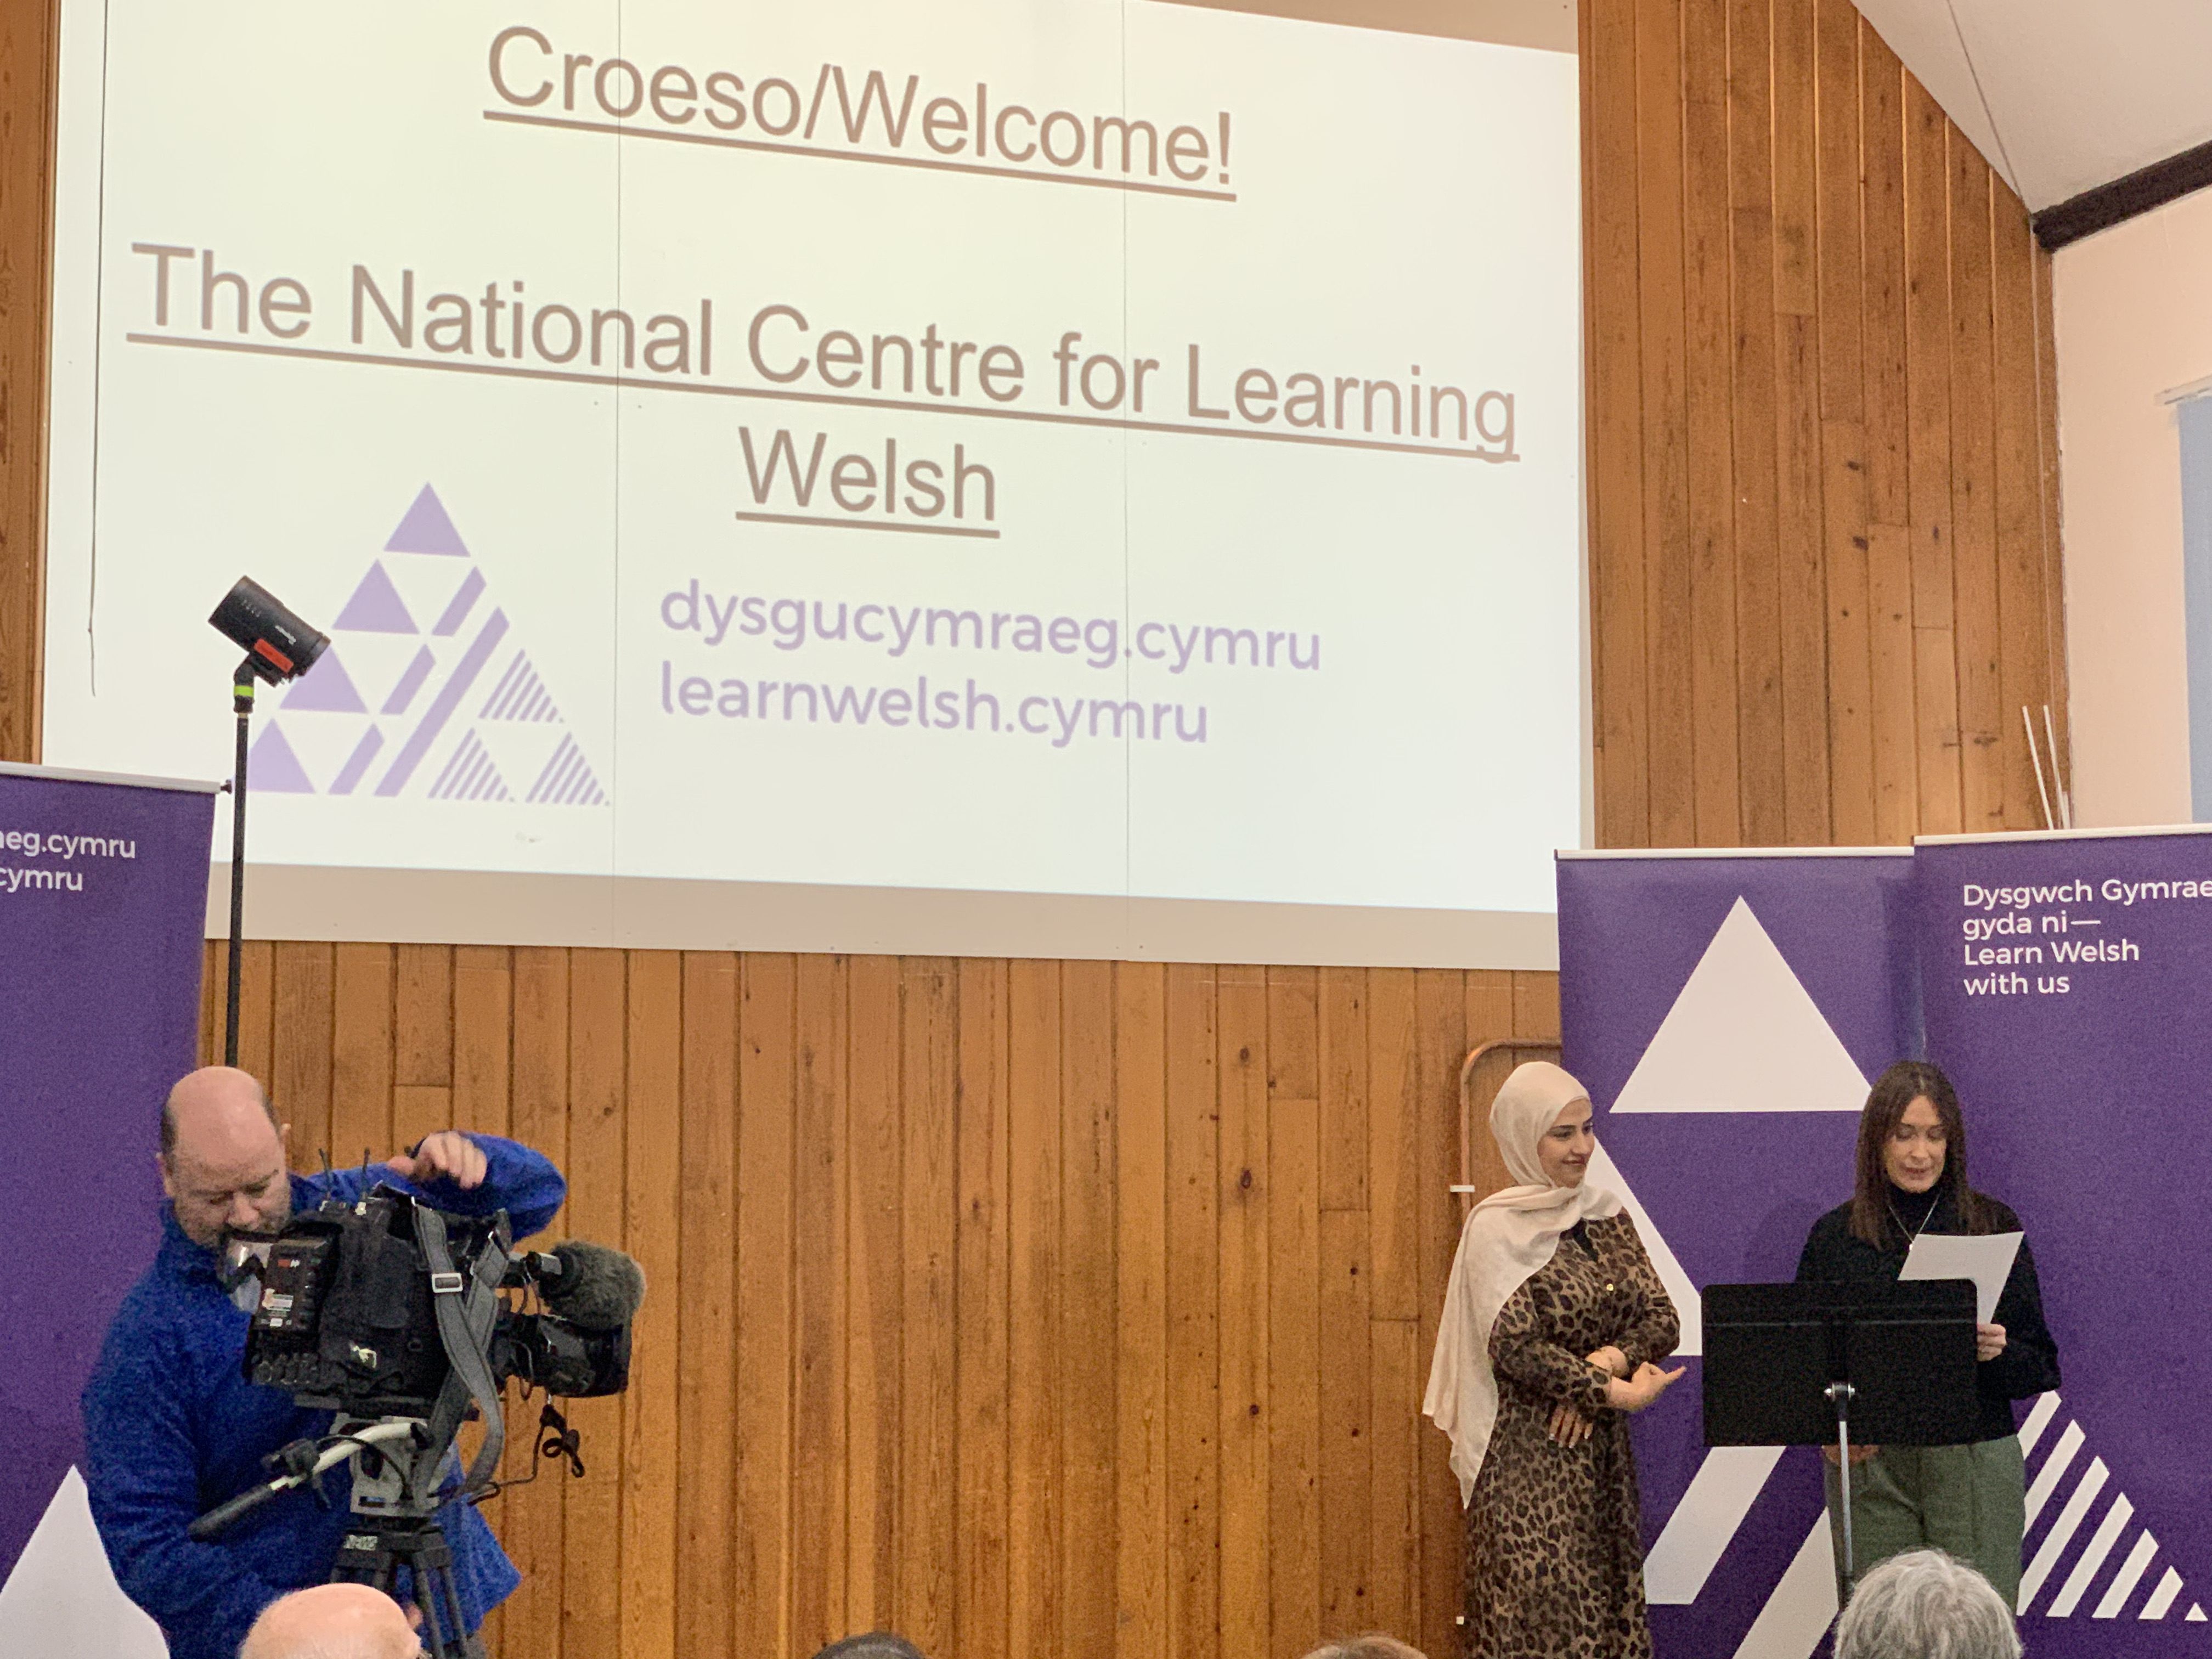 People presenting at the National Centre for Learning Welsh